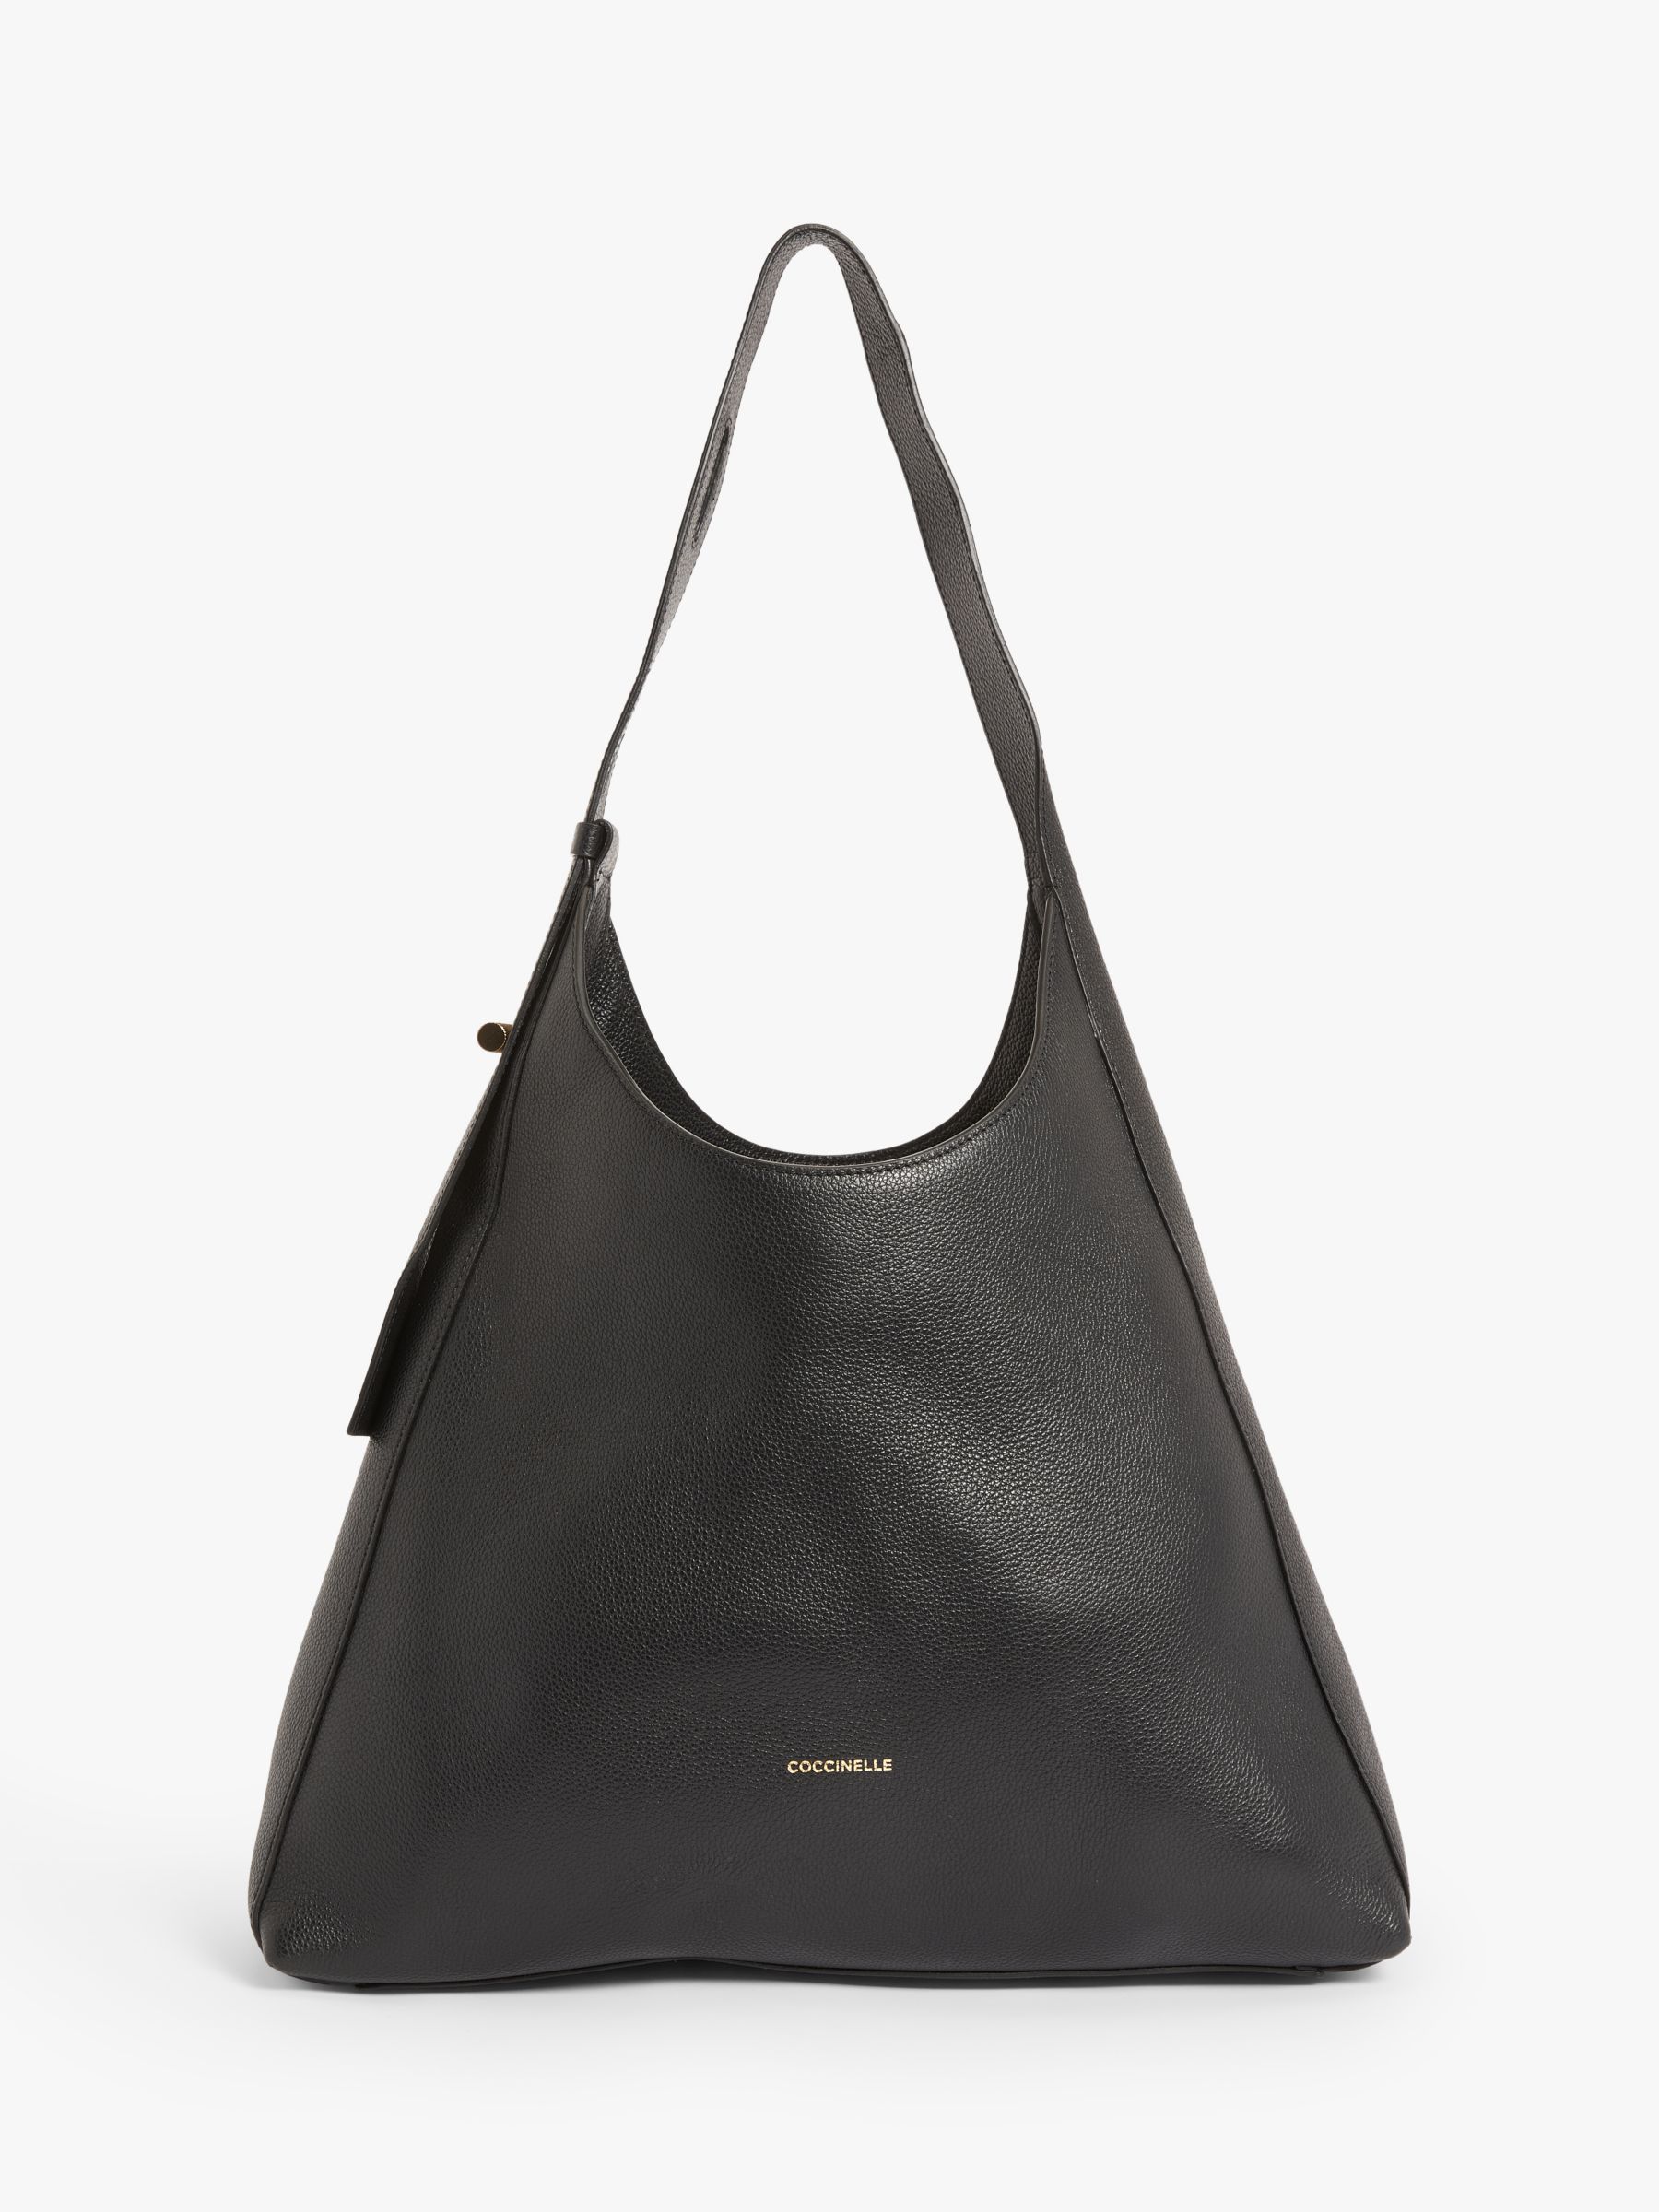 Coccinelle Fedra Leather Hobo Bag